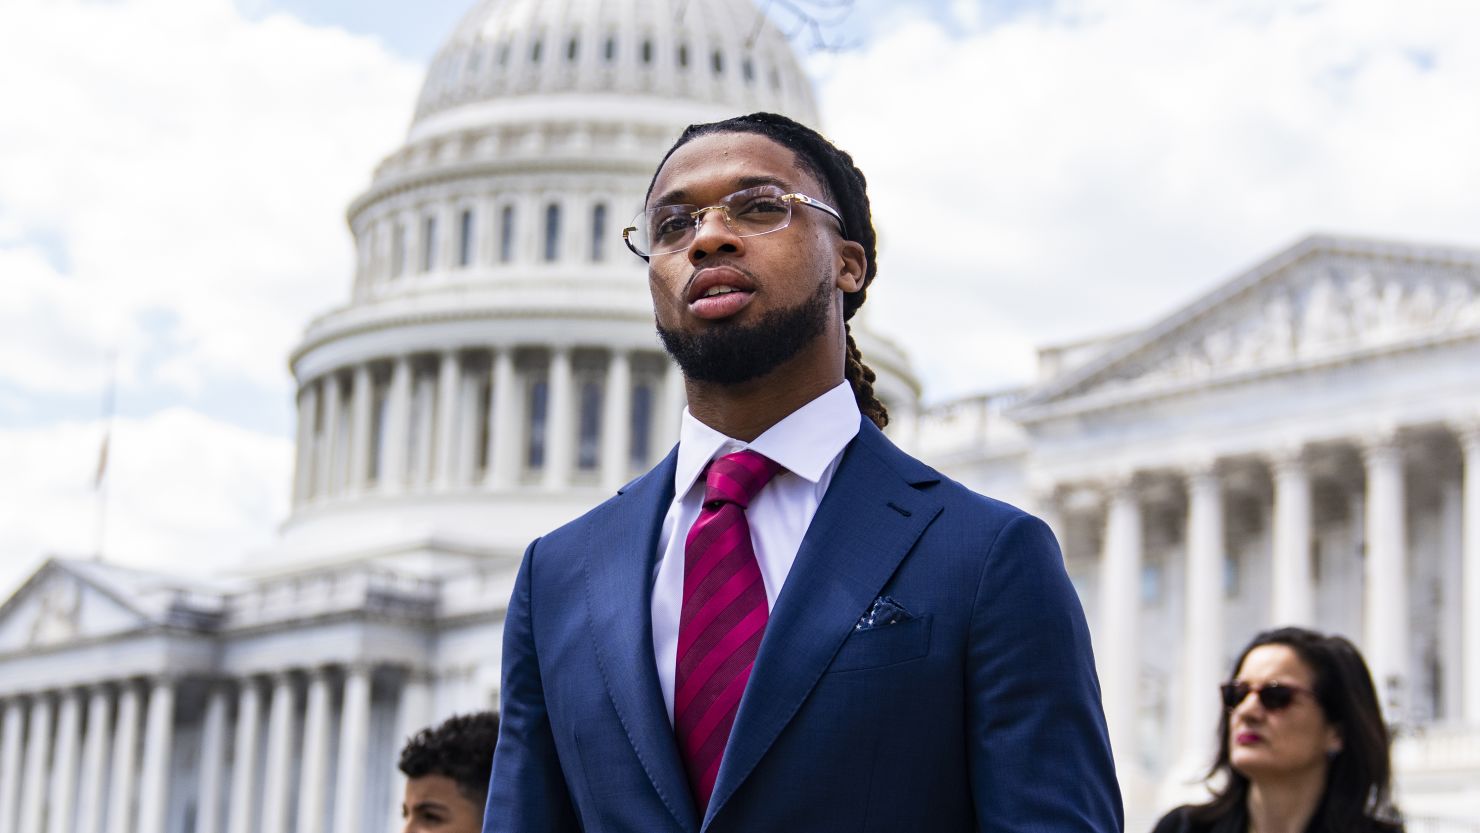 Buffalo Bills safety Damar Hamlin spoke on Capitol Hill on Wednesday in support of the Access to AEDs Act.